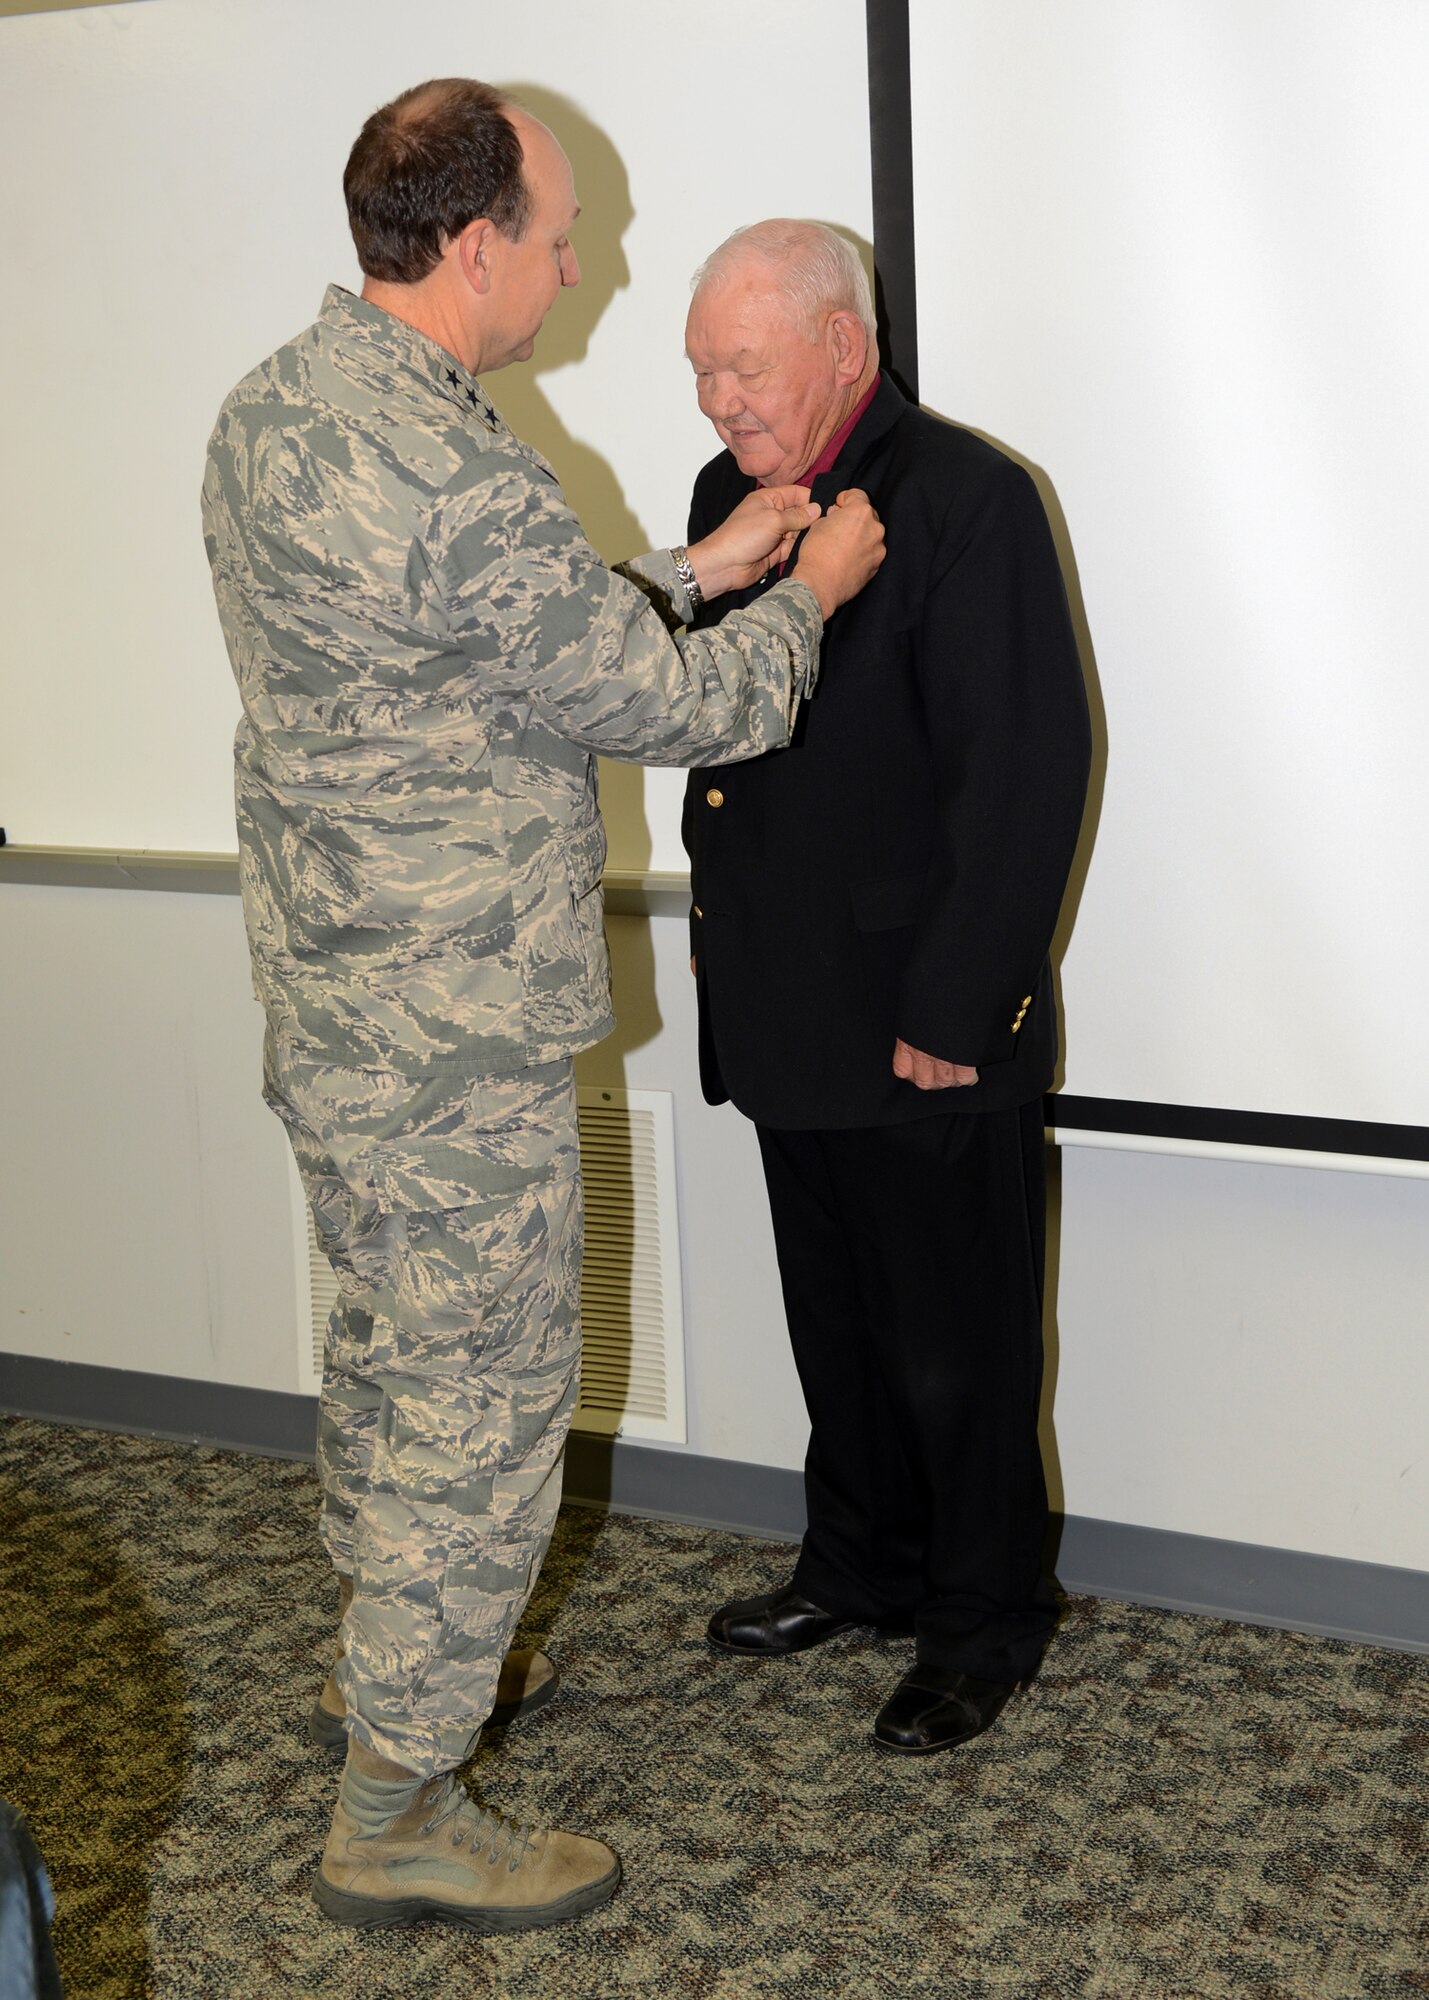 Dr. Troy Corder, an education specialist with the 72nd Force Support Squadron, was awarded his 50-year pin and certificate on Tuesday by Air Force Sustainment Center Commander Lt. Gen. Bruce Litchfield. Dr. Corder has worked as a civil servant at Tinker for 47 years and served three years in the Army. (Air Force photo by Kelly White)